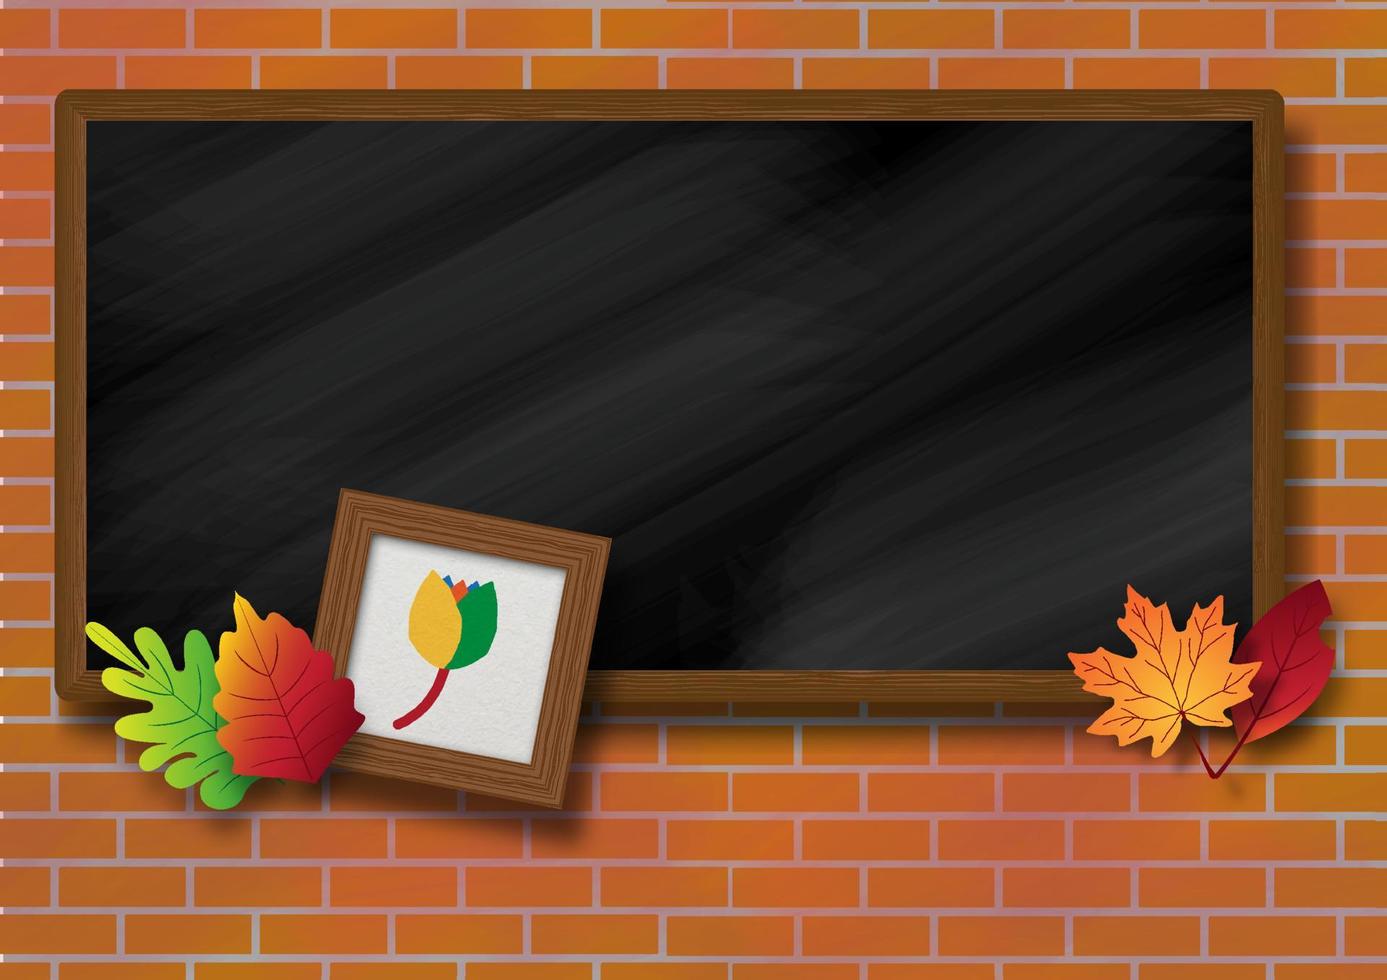 Small wooden photo frame with autumn leaves on school blackboard and brick wall background. All in vector design.